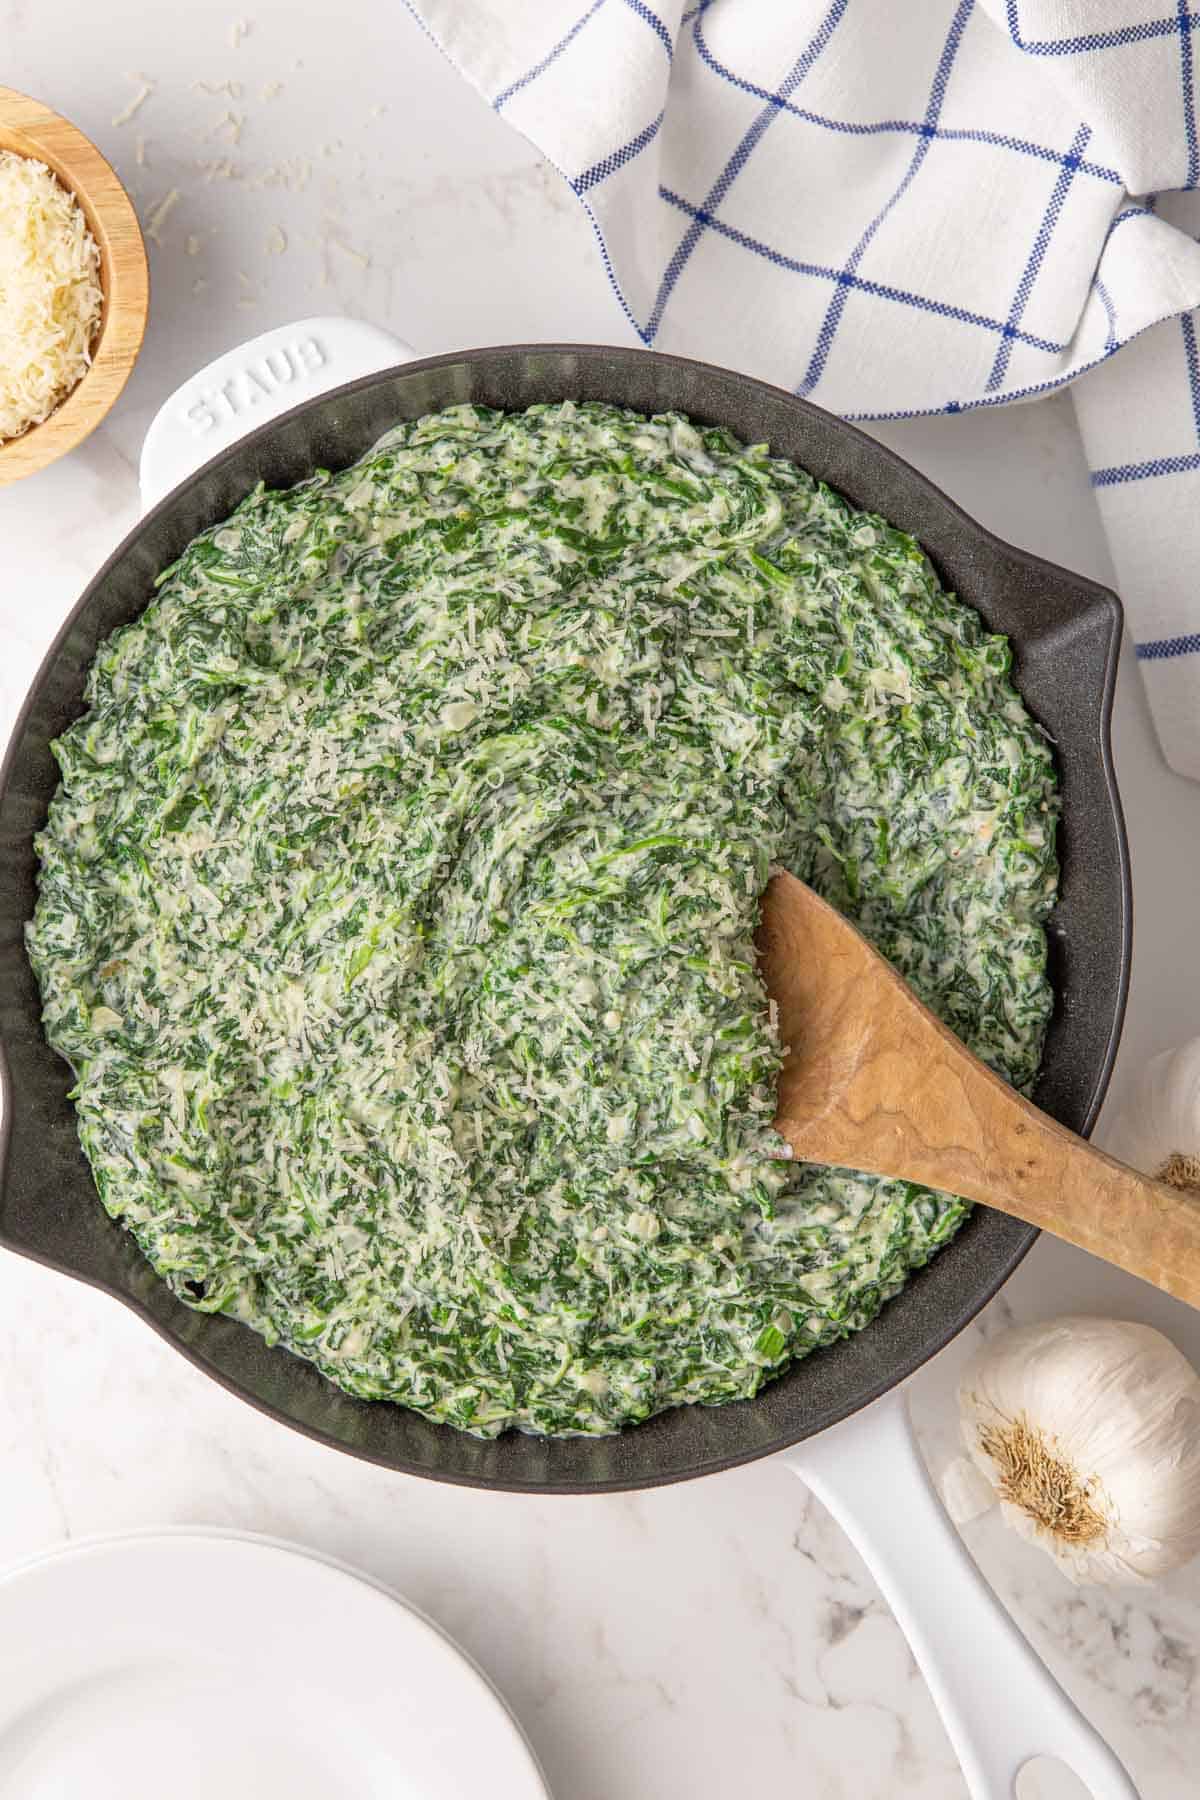 Creamed spinach sprinkled with grated Parmesan in a skillet.